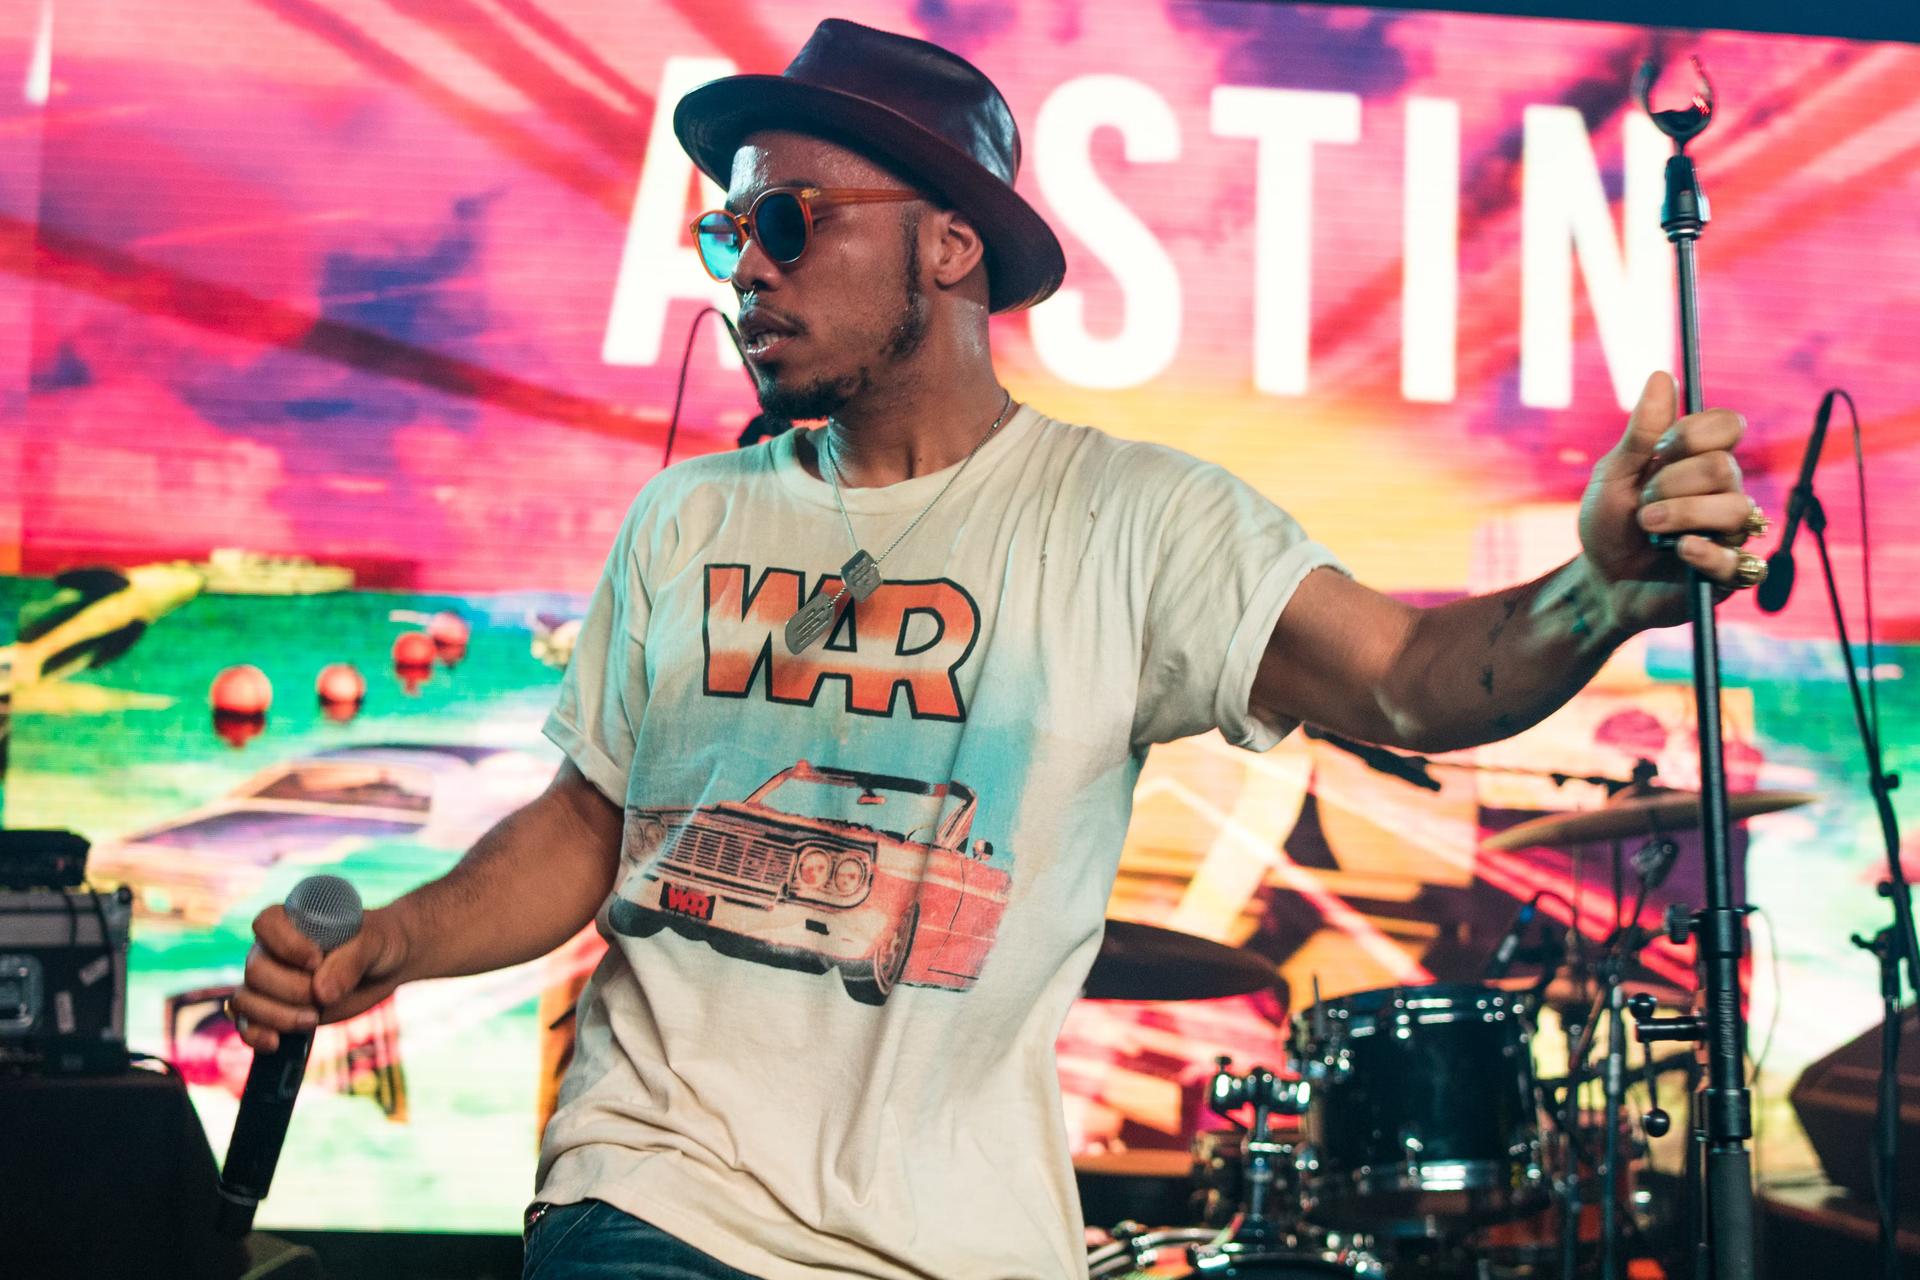 Singer, songwriter, and rapper Anderson Paak performs at a concert during SXSW 2016 in Austin, Texas